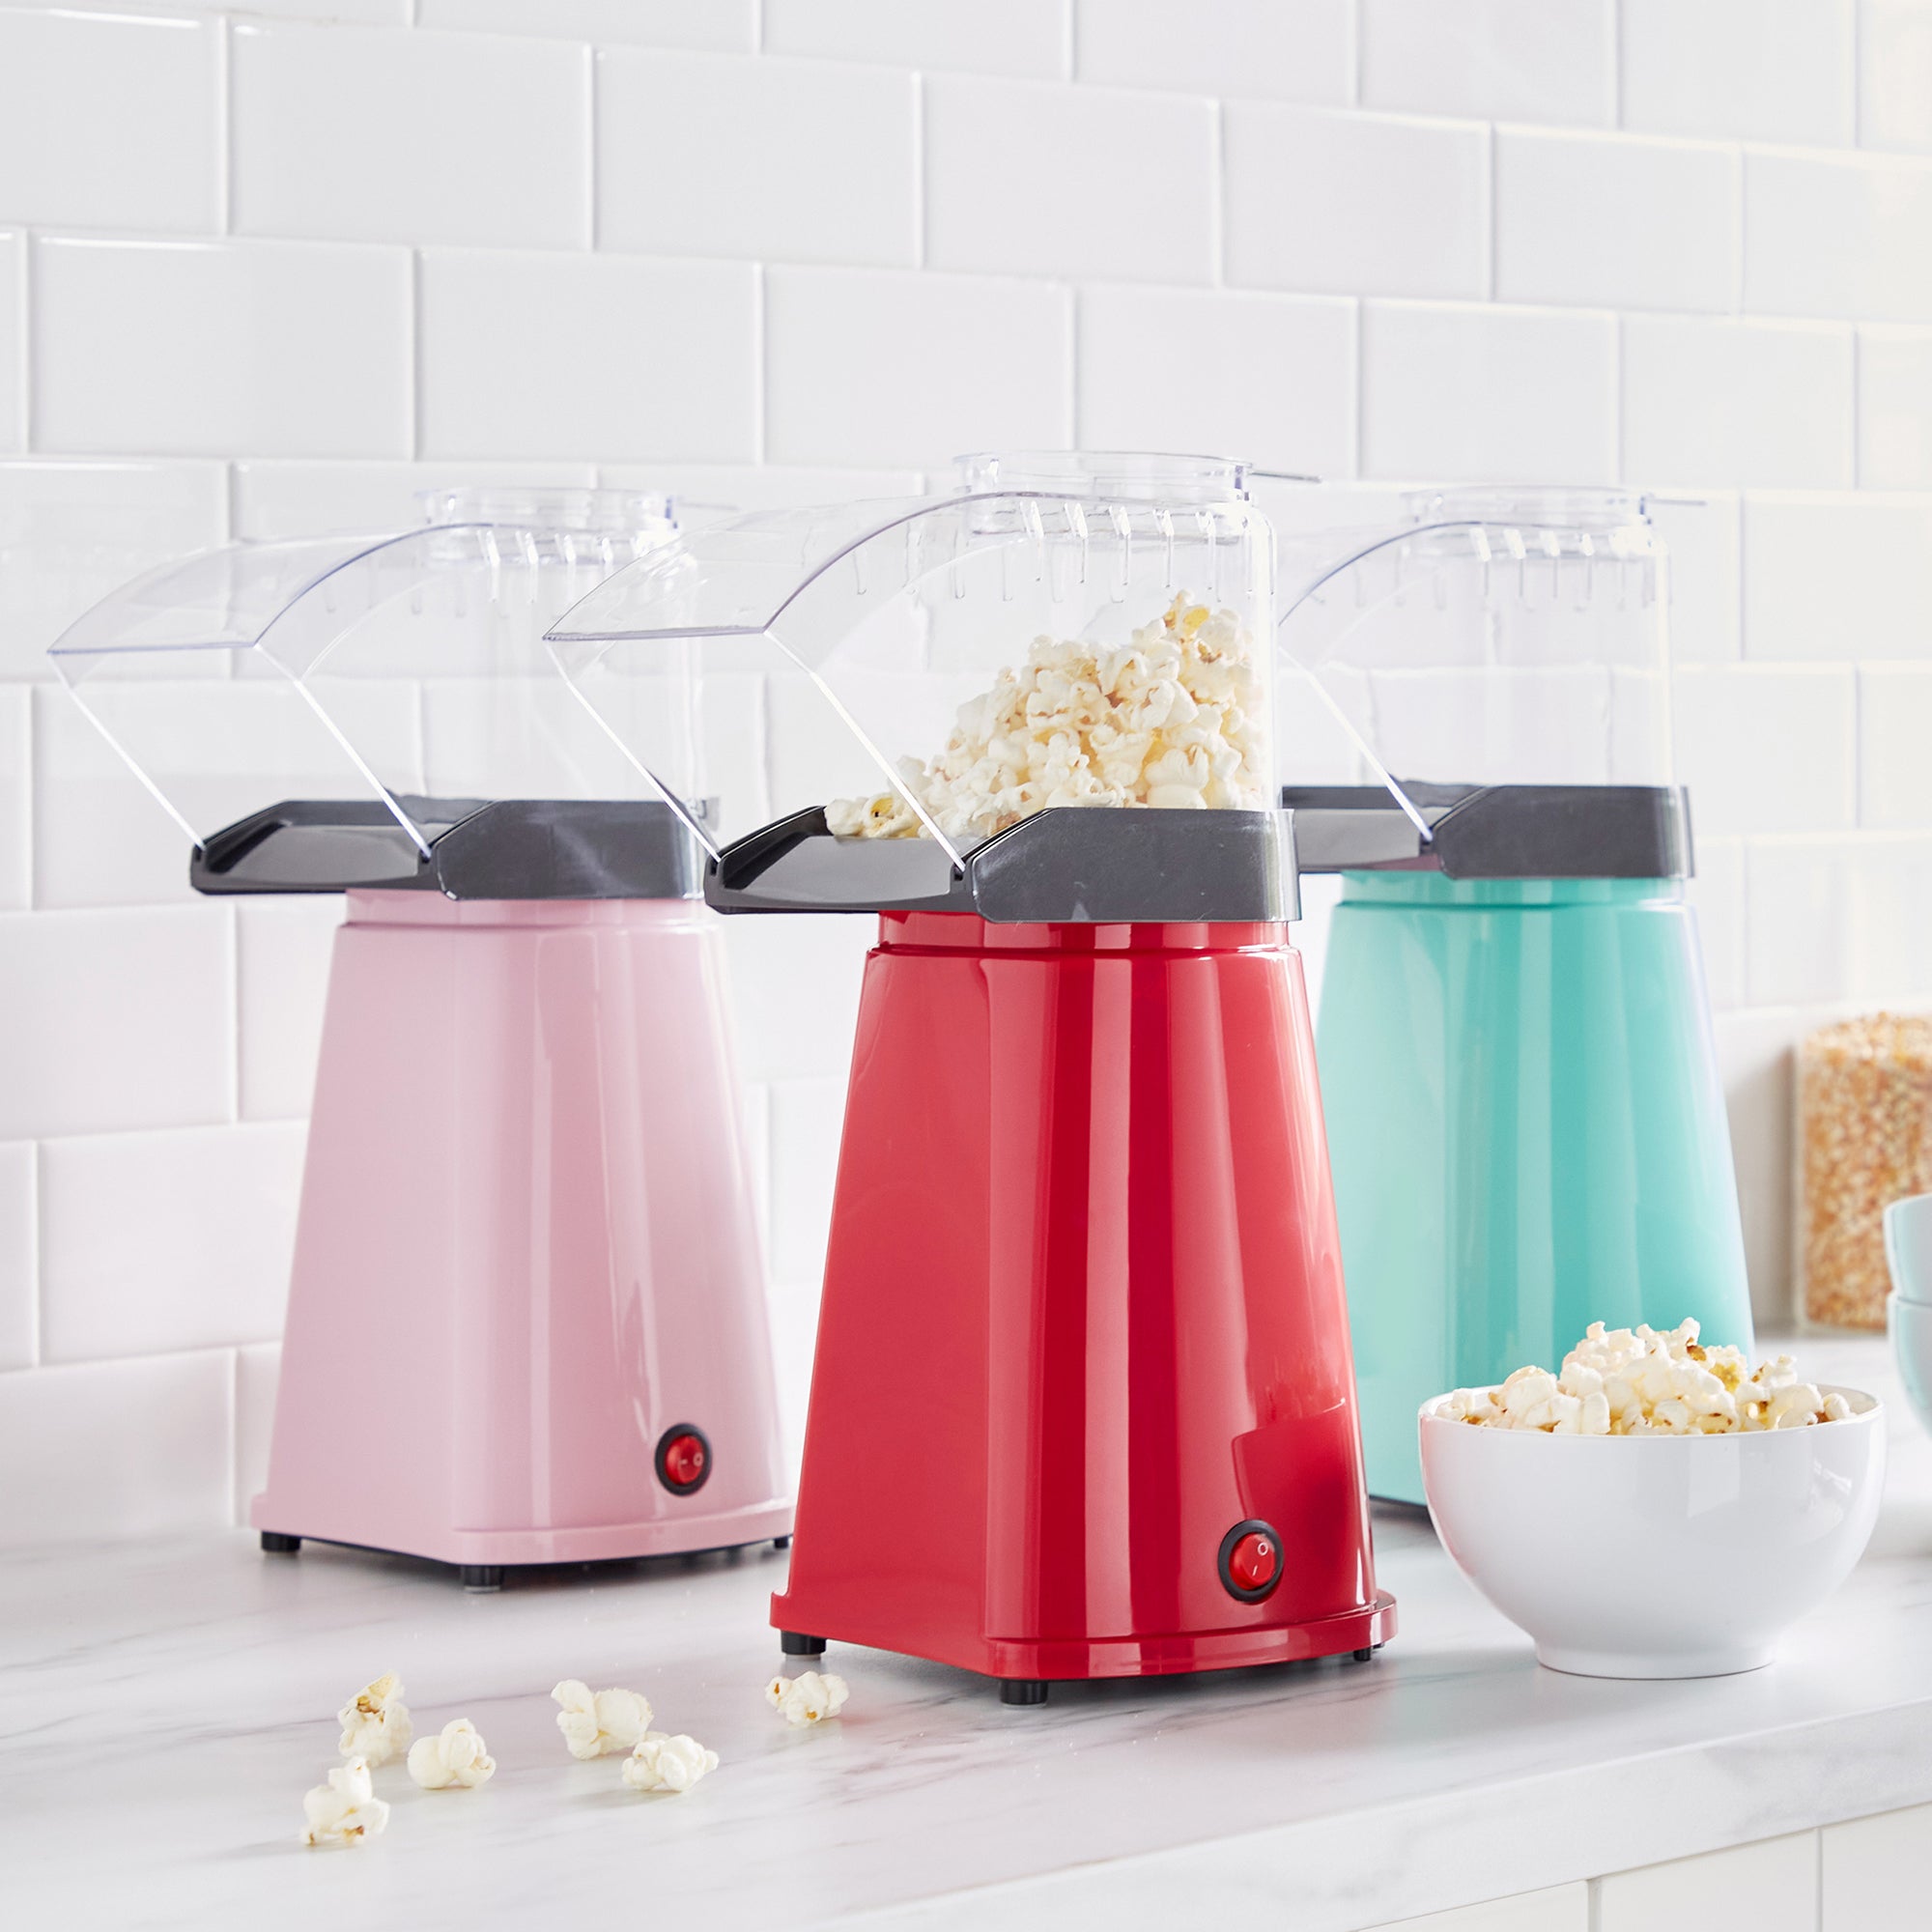 Cuisinart Popcorn Maker, Stainless Steel/Red, 16 Cup